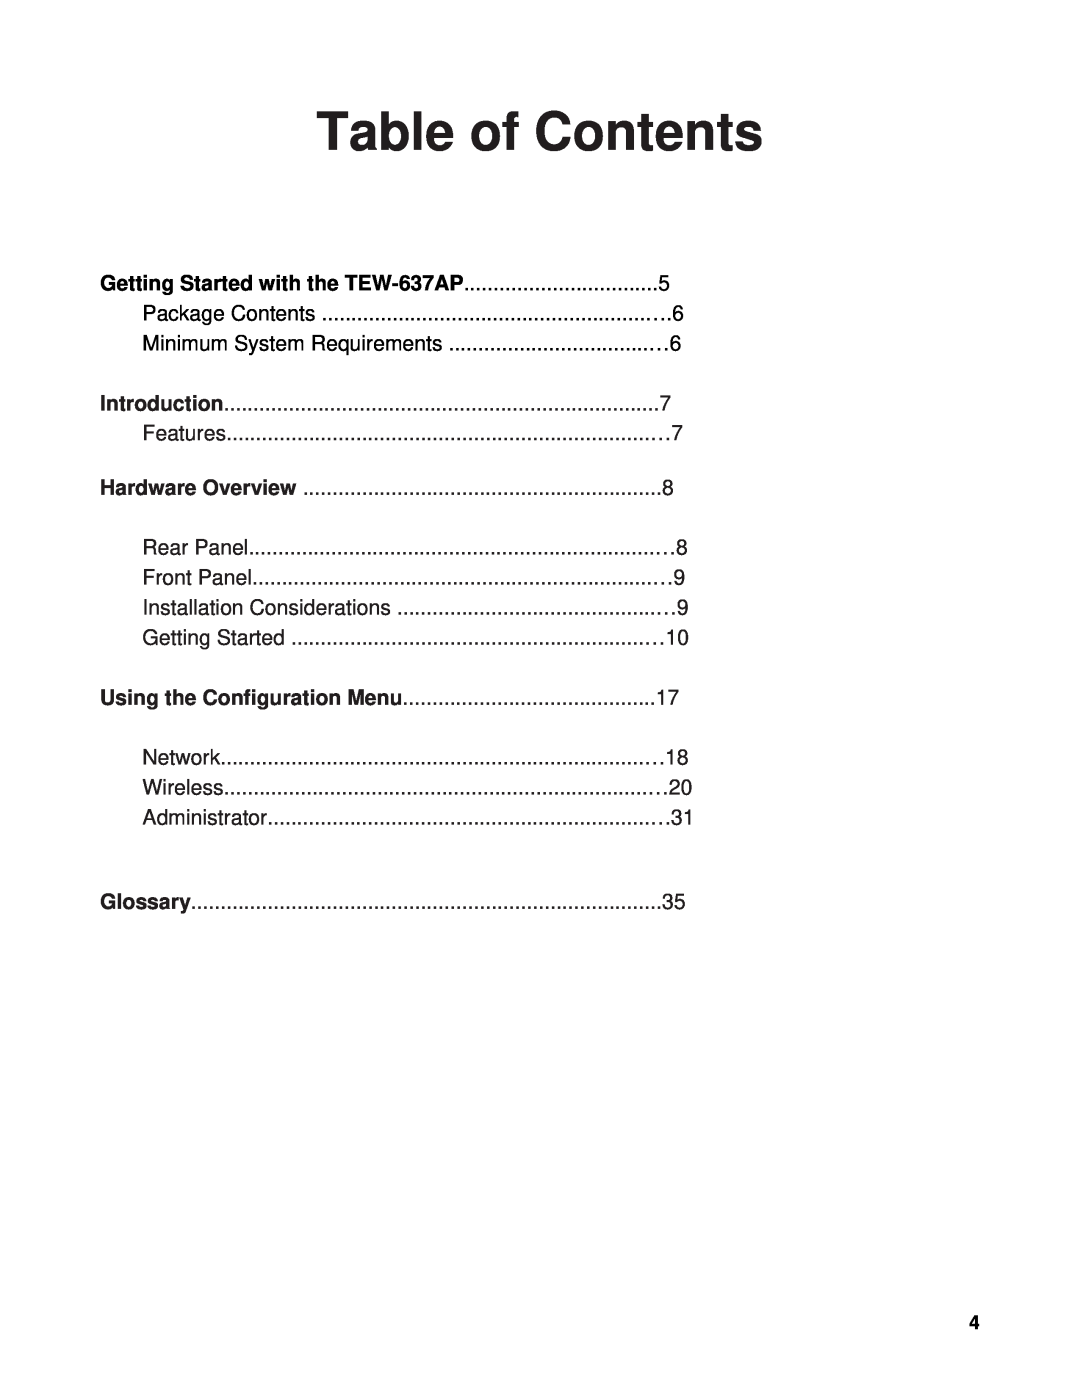 TRENDnet manual Table of Contents, Getting Started with the TEW-637AP 